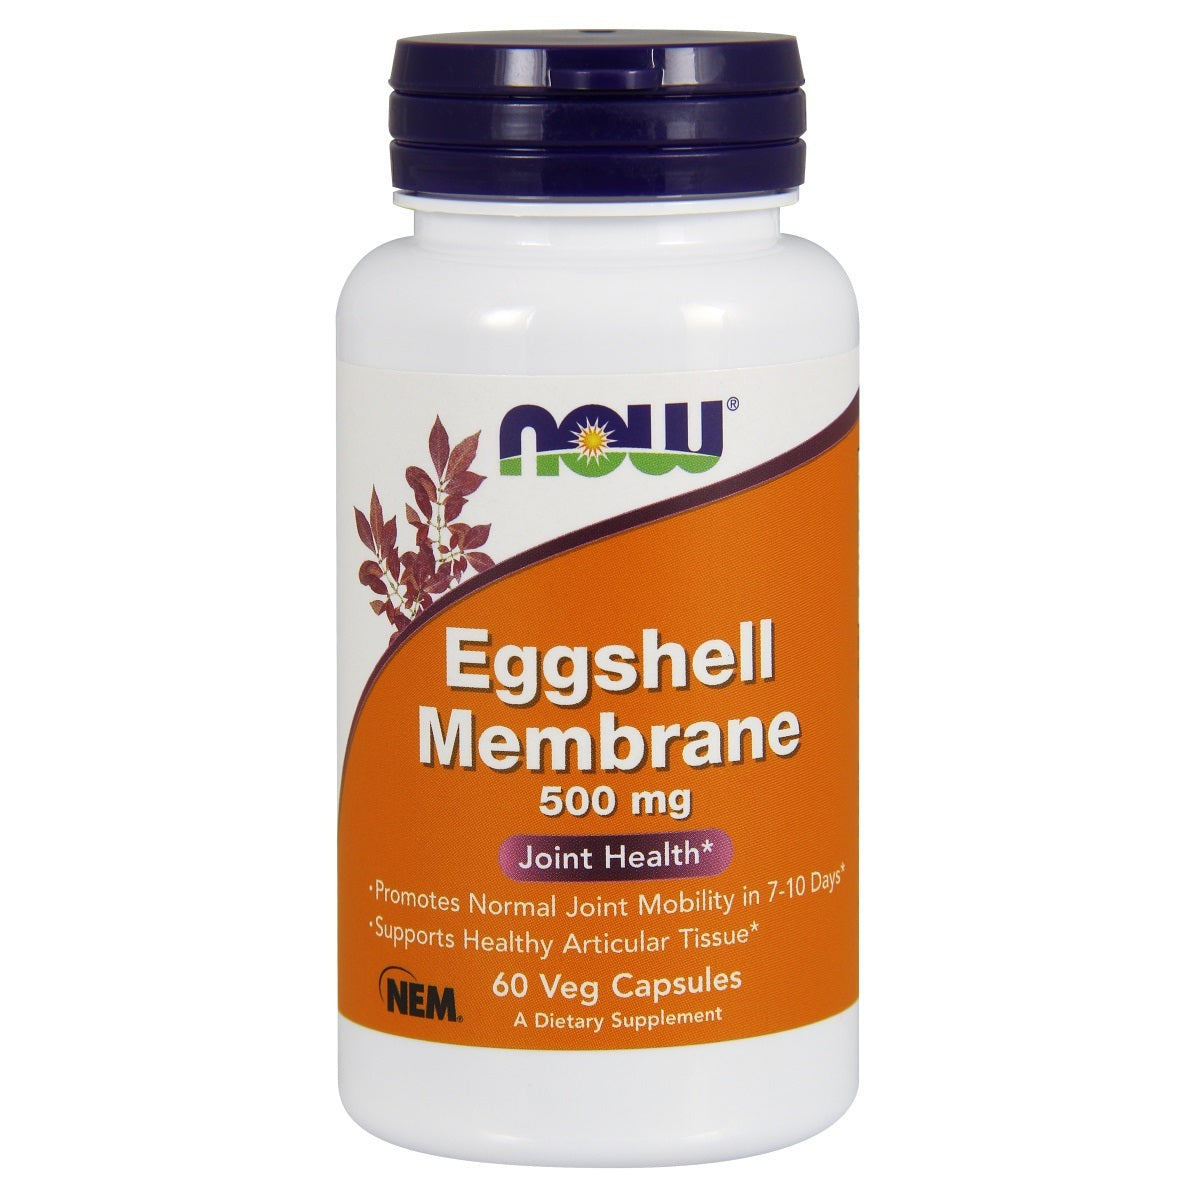 Primary image of Eggshell Membrane - 500mg